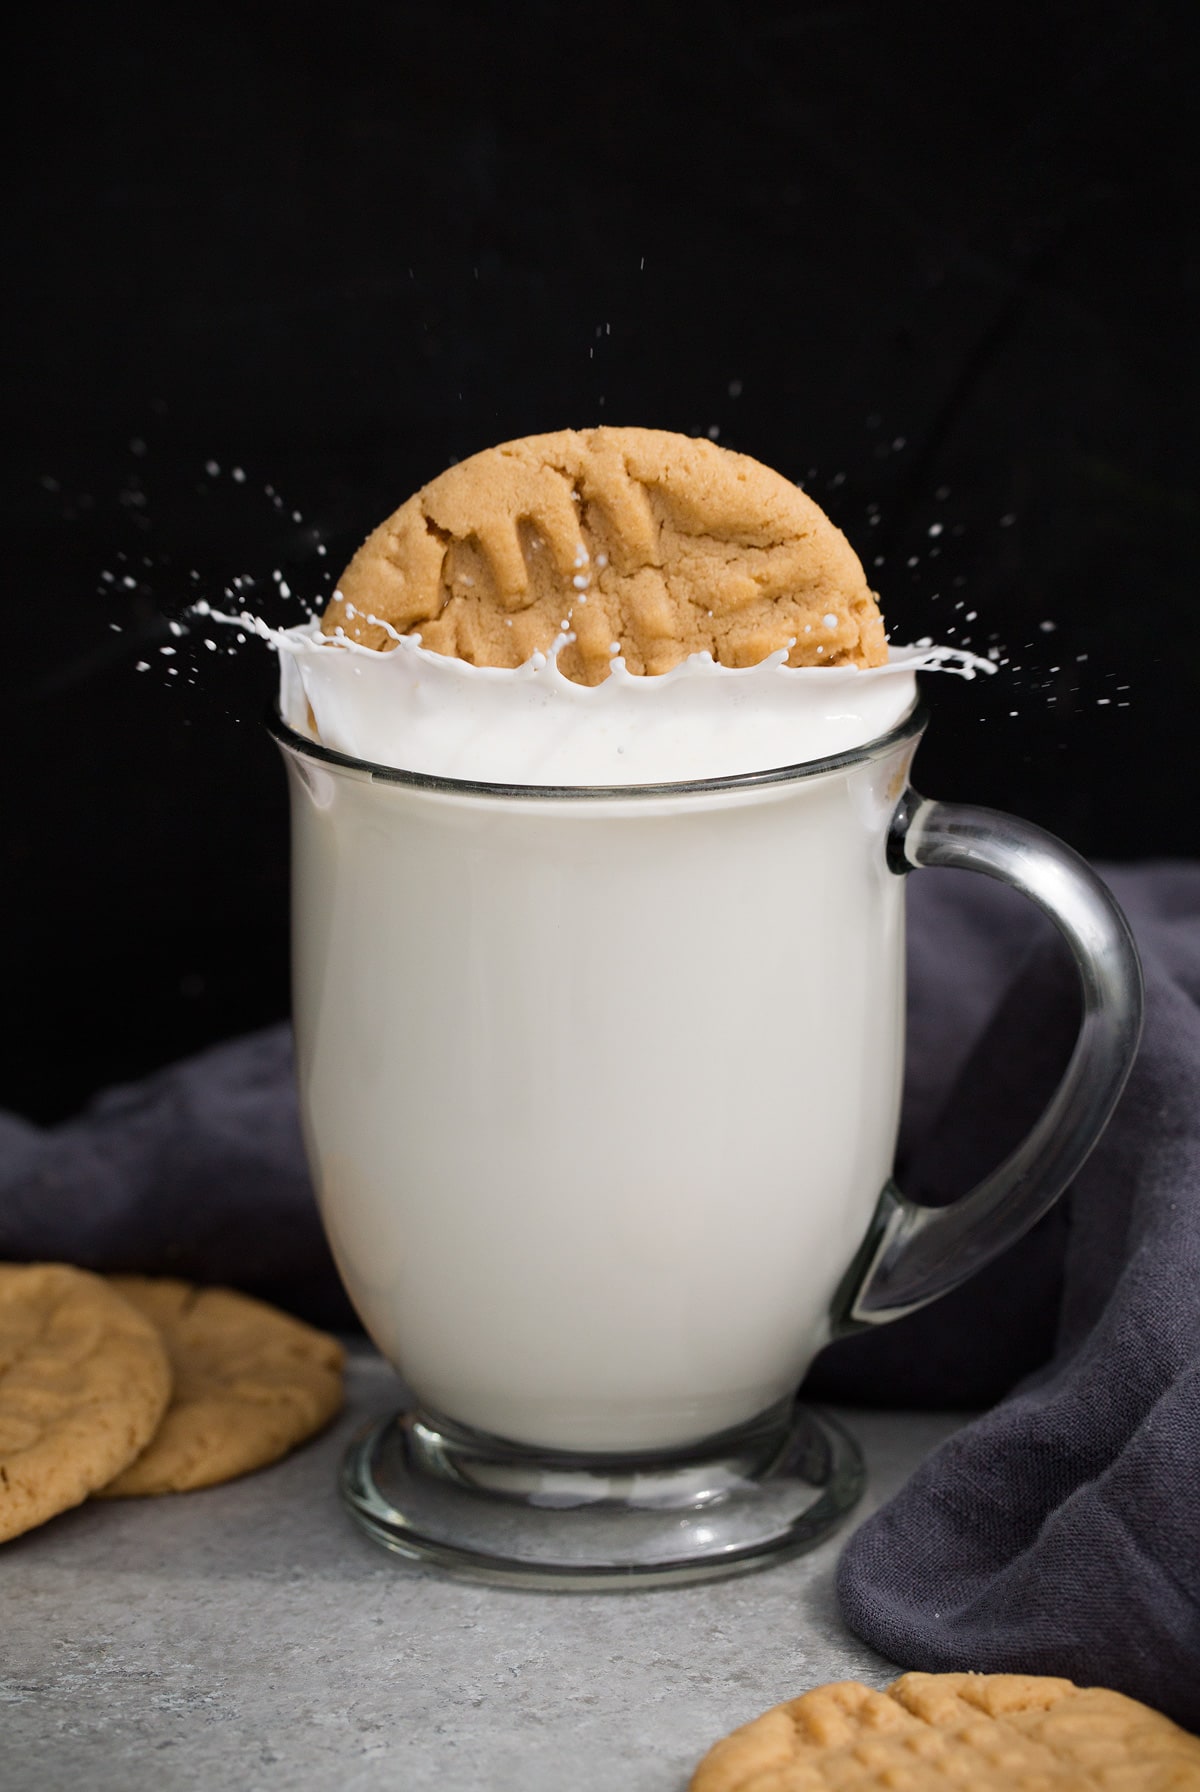 Peanut Butter Cookies dropped in milk and splashing.